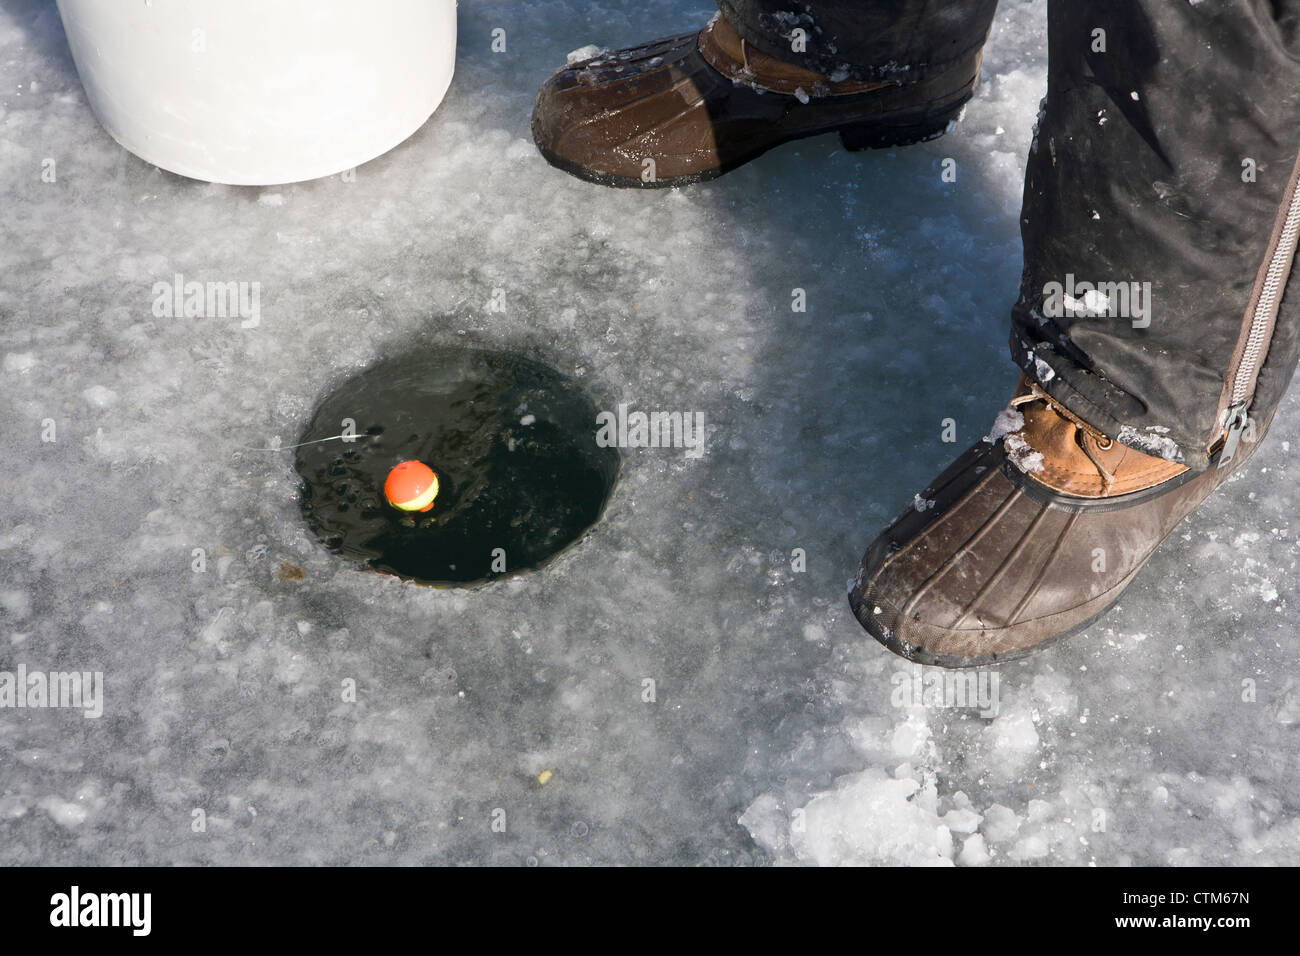 Bobber in a Hole in the Ice Stock Photo - Image of cracksinice,  winterfishing: 58142772